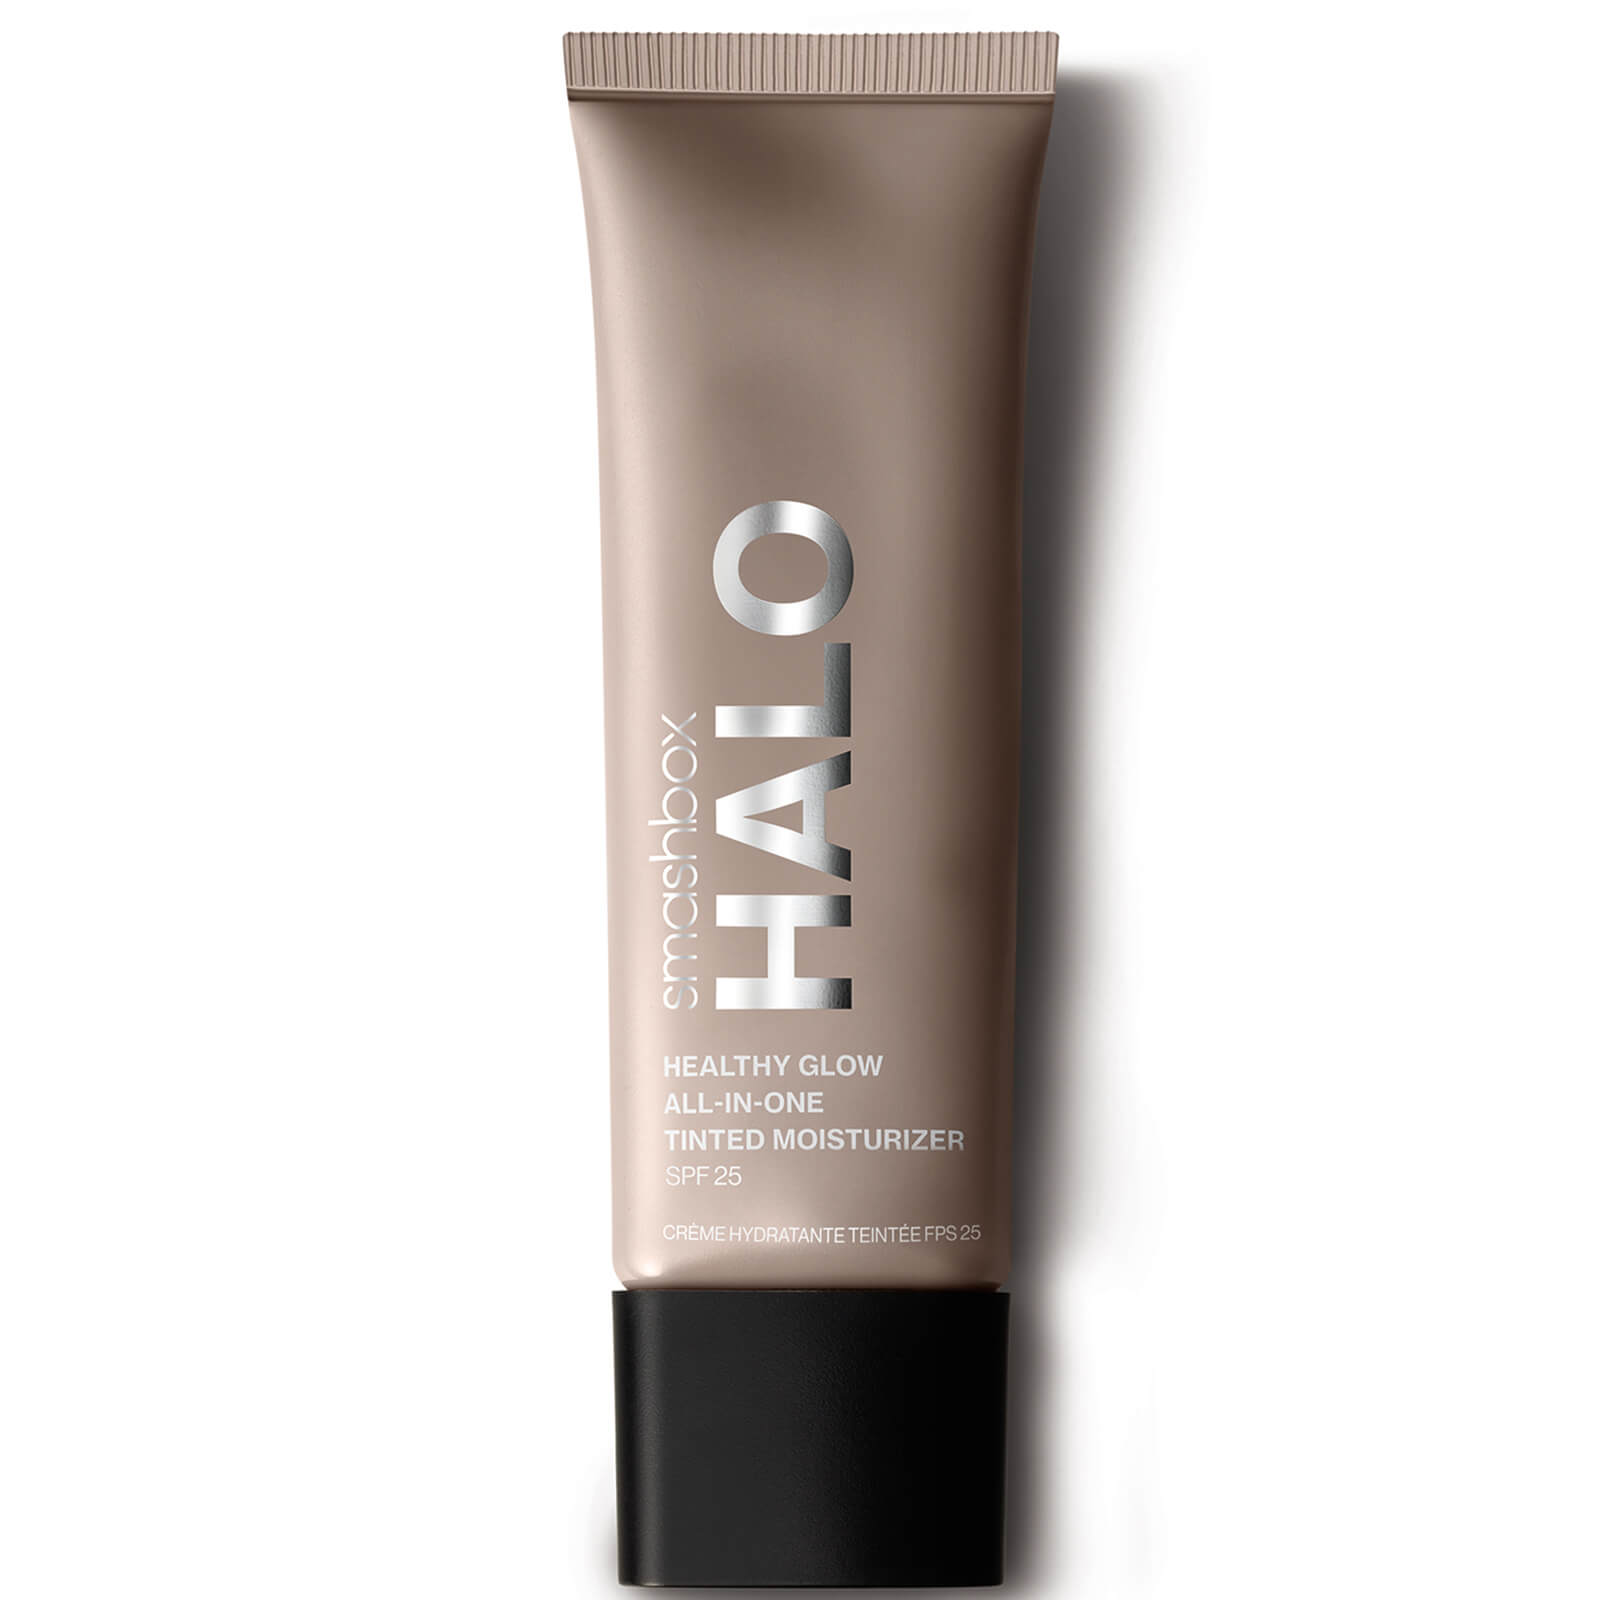 Image of Smashbox Halo Healthy Glow All-in-One SPF25 Tinted Moisturiser 40ml (Various Shades) - Medium Neutral